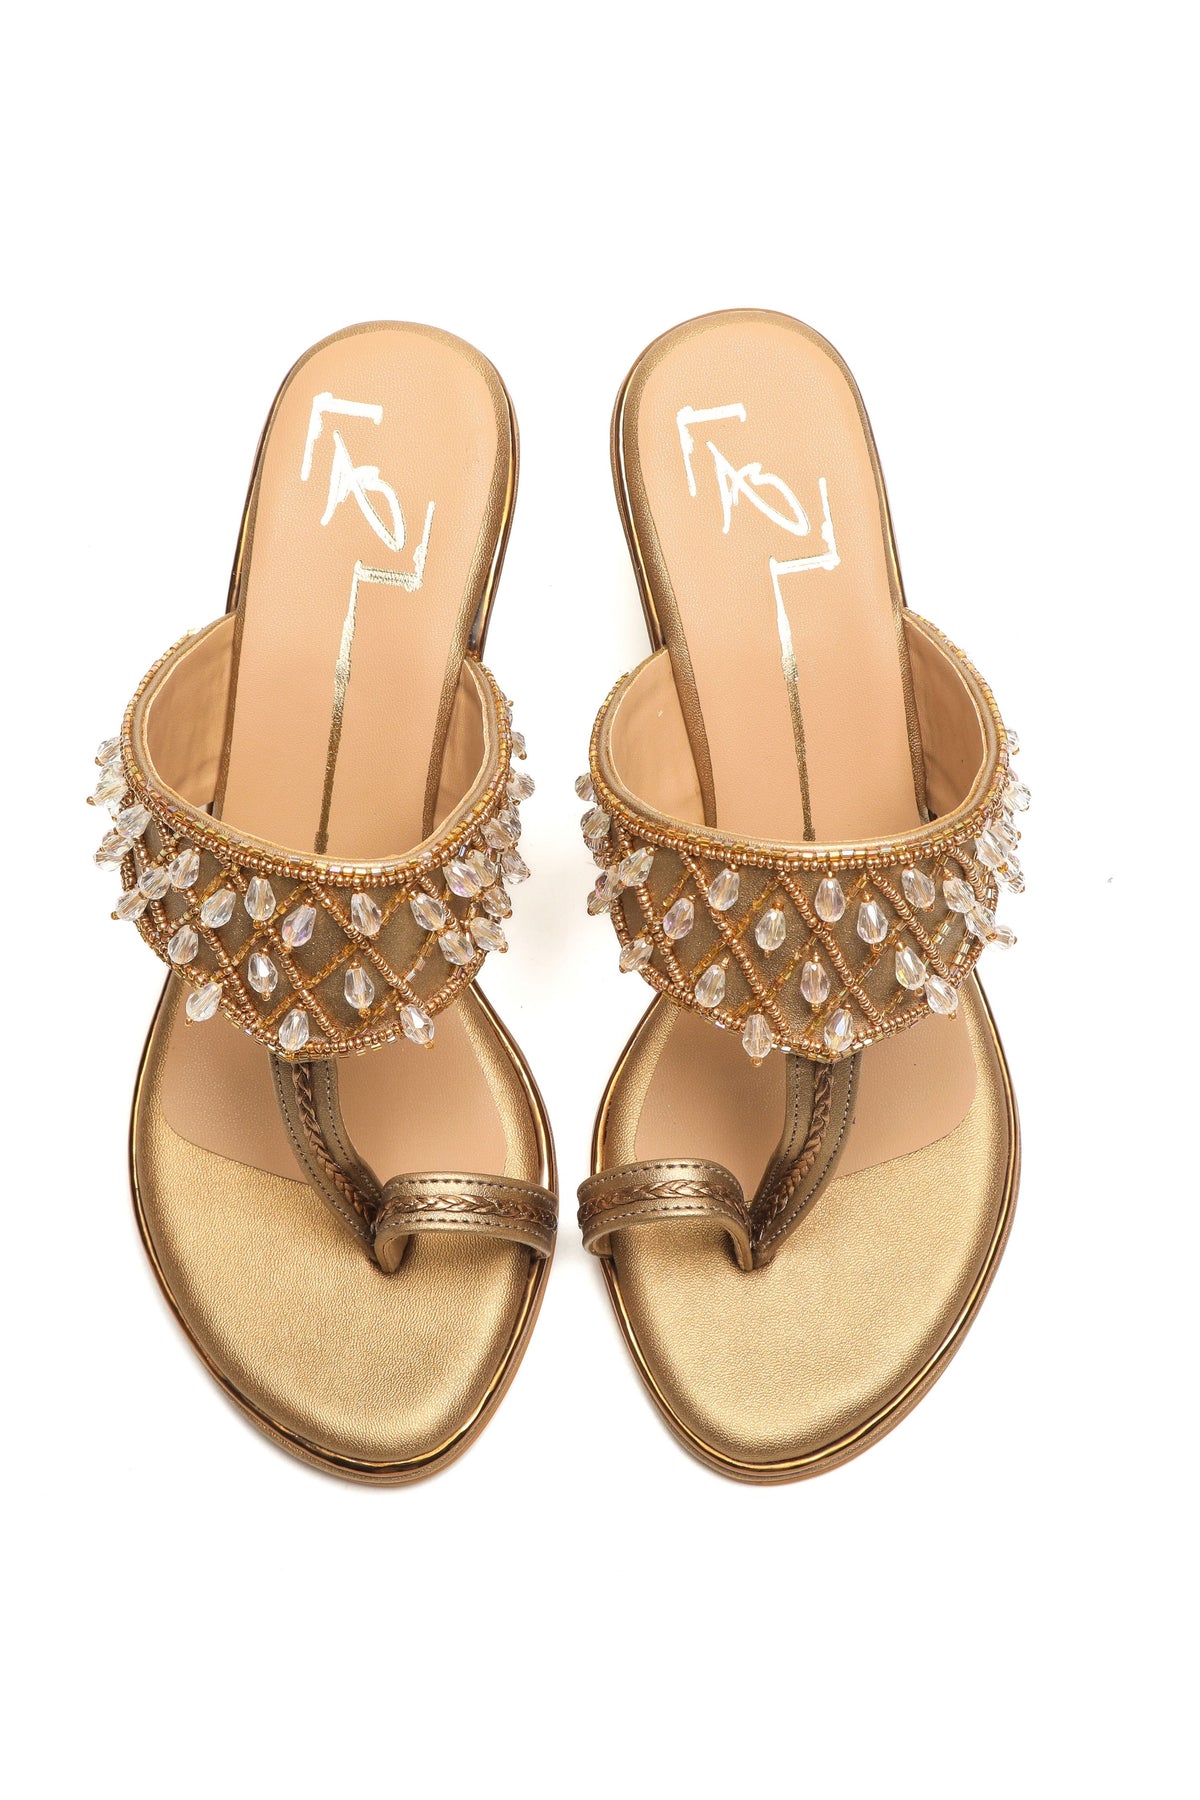 Embroidered Antique Gold Block Heels